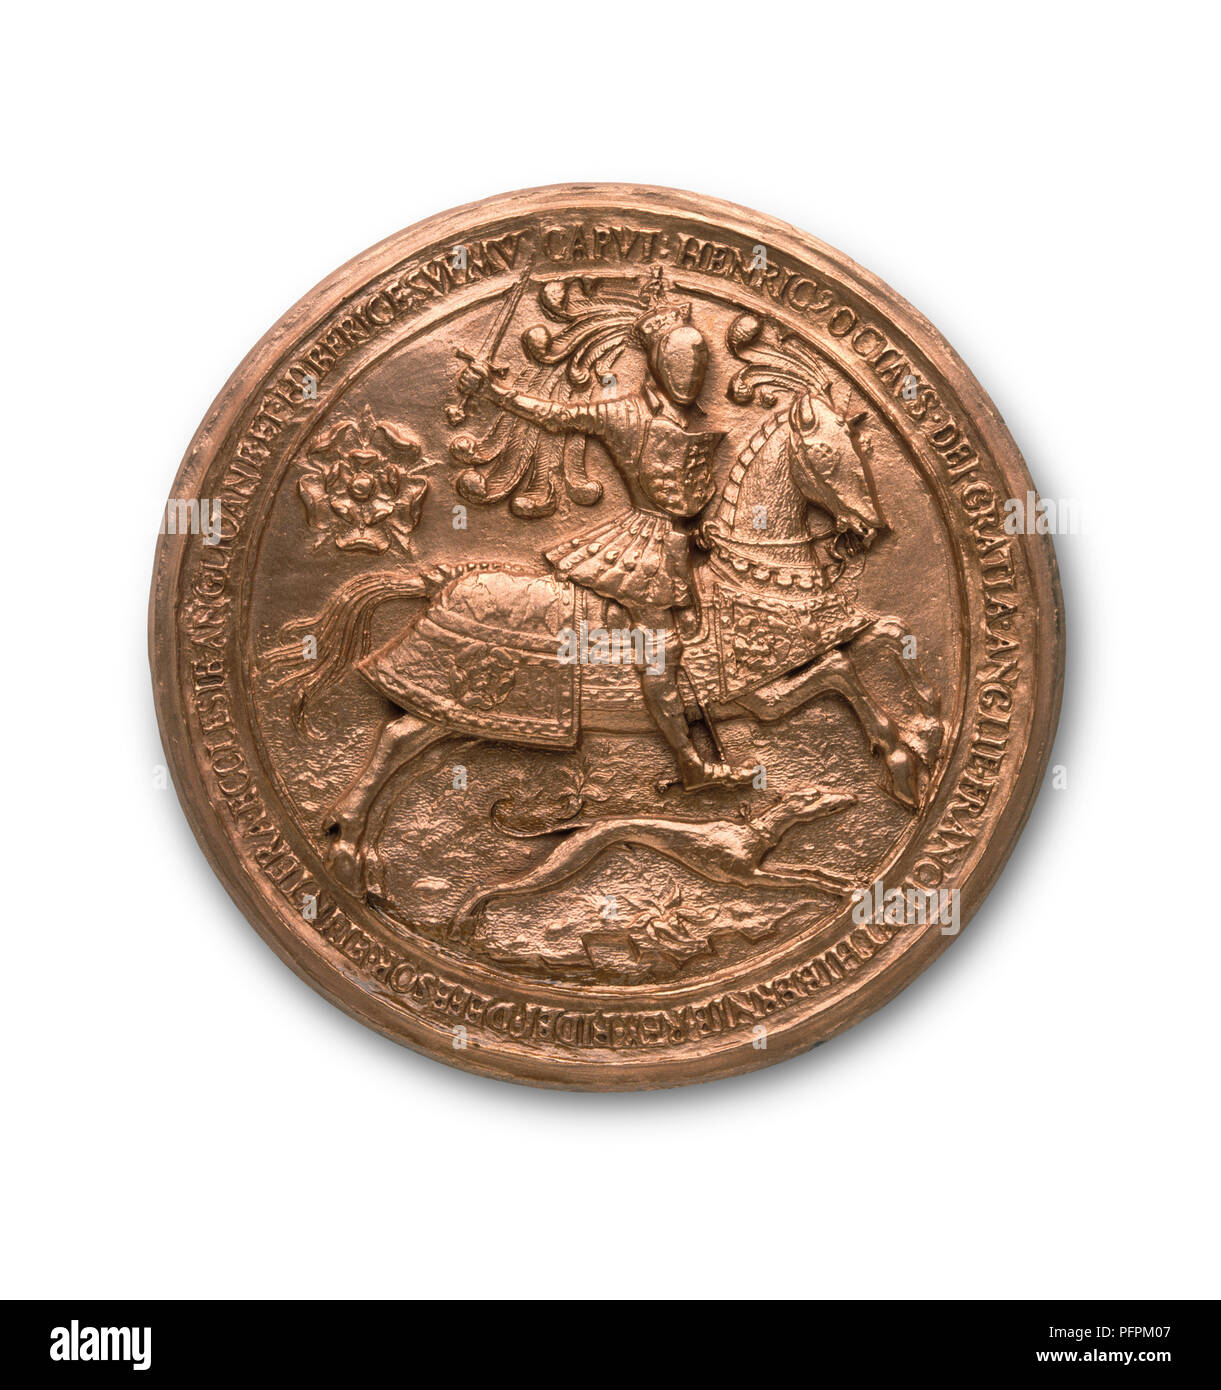 Seal depicting knight on horseback with running dog below Stock Photo